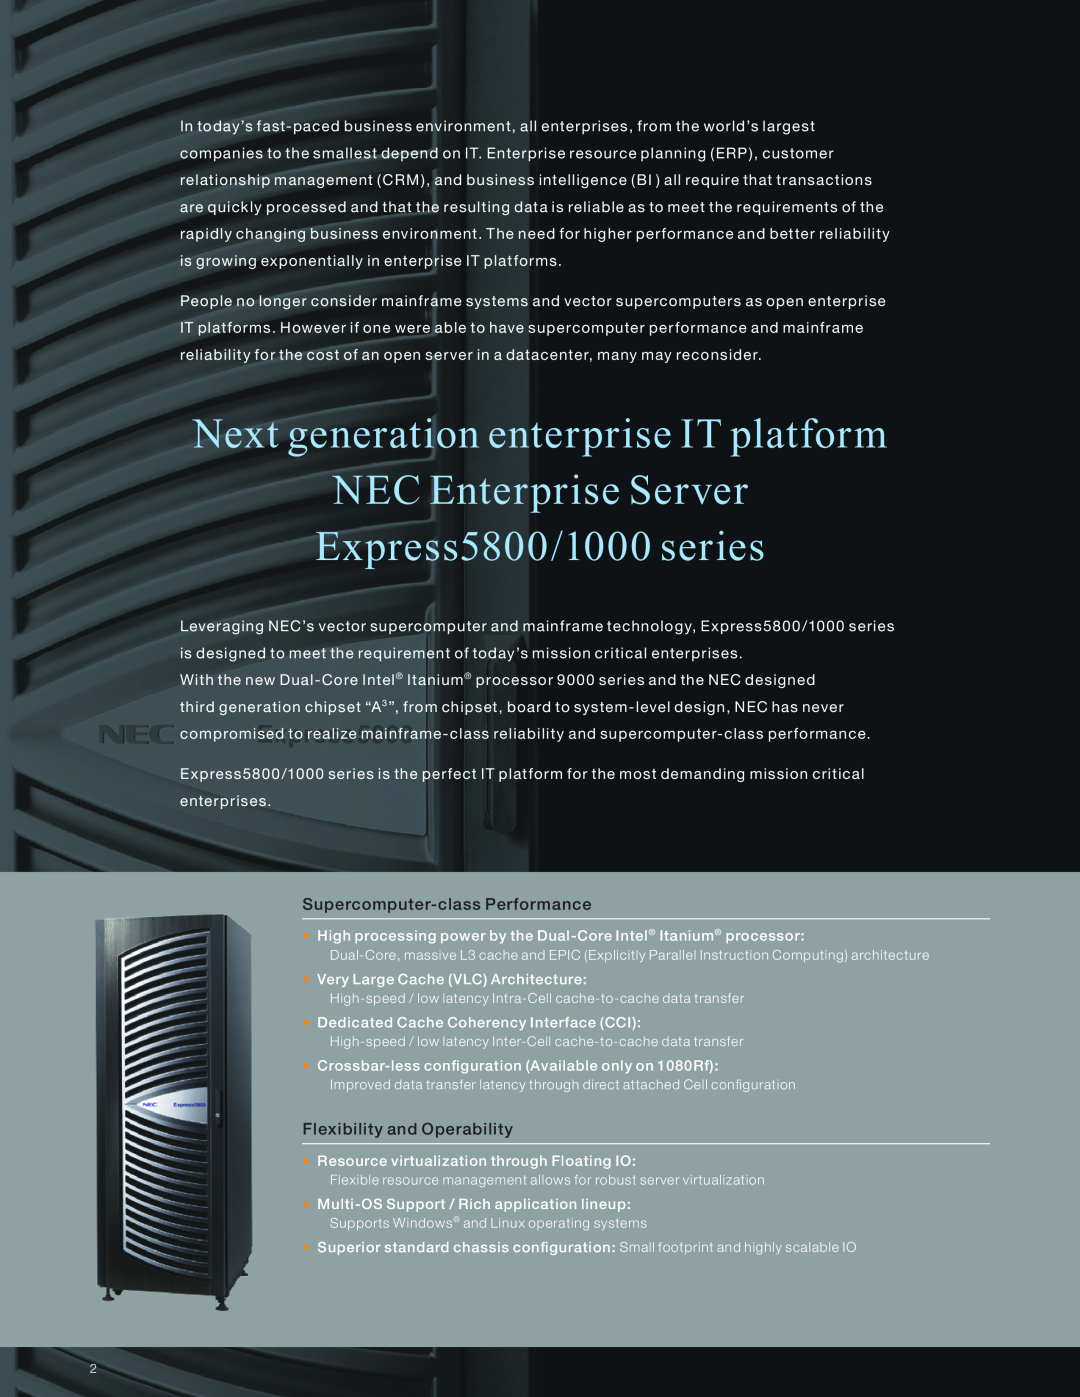 NEC 1080Rf, 5800 Series Supercomputer-class Performance, Flexibility and Operability, Very Large Cache VLC Architecture 